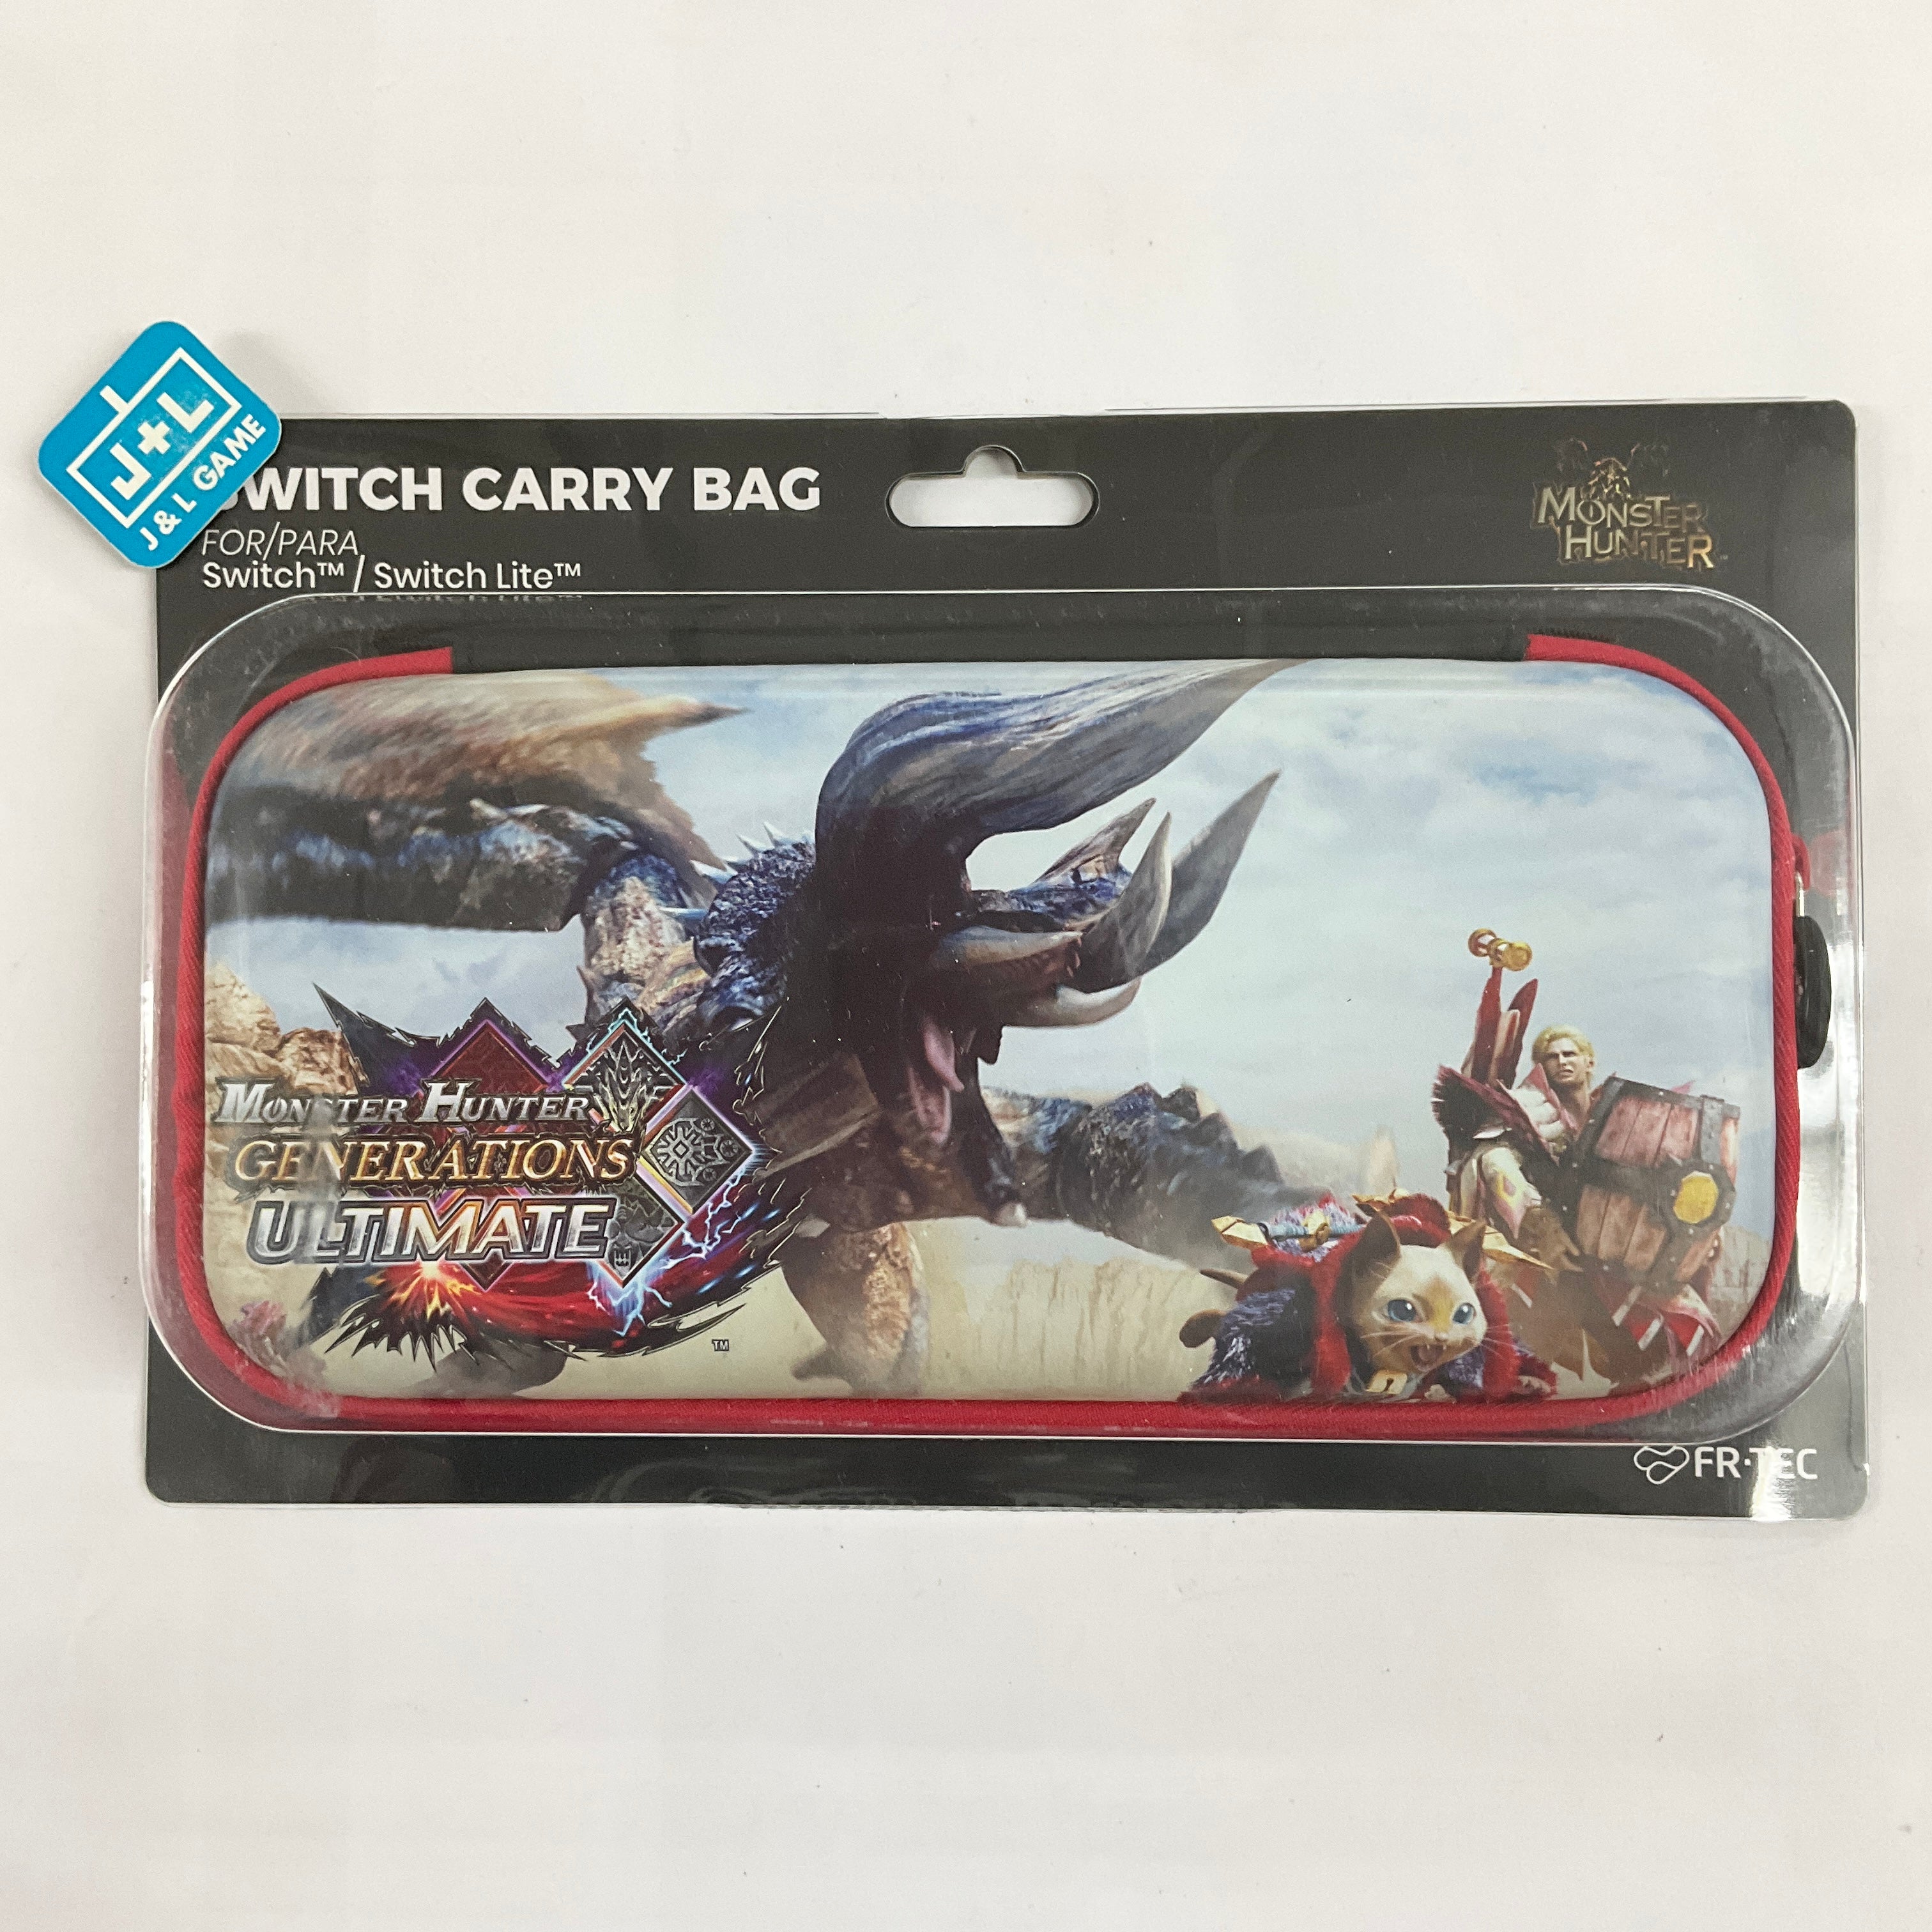 Fr-TEC Nintendo Switch Carry Bag (Monster Hunter Generations Ultimate) - (NSW) Nintendo Switch Accessories FRTEC   